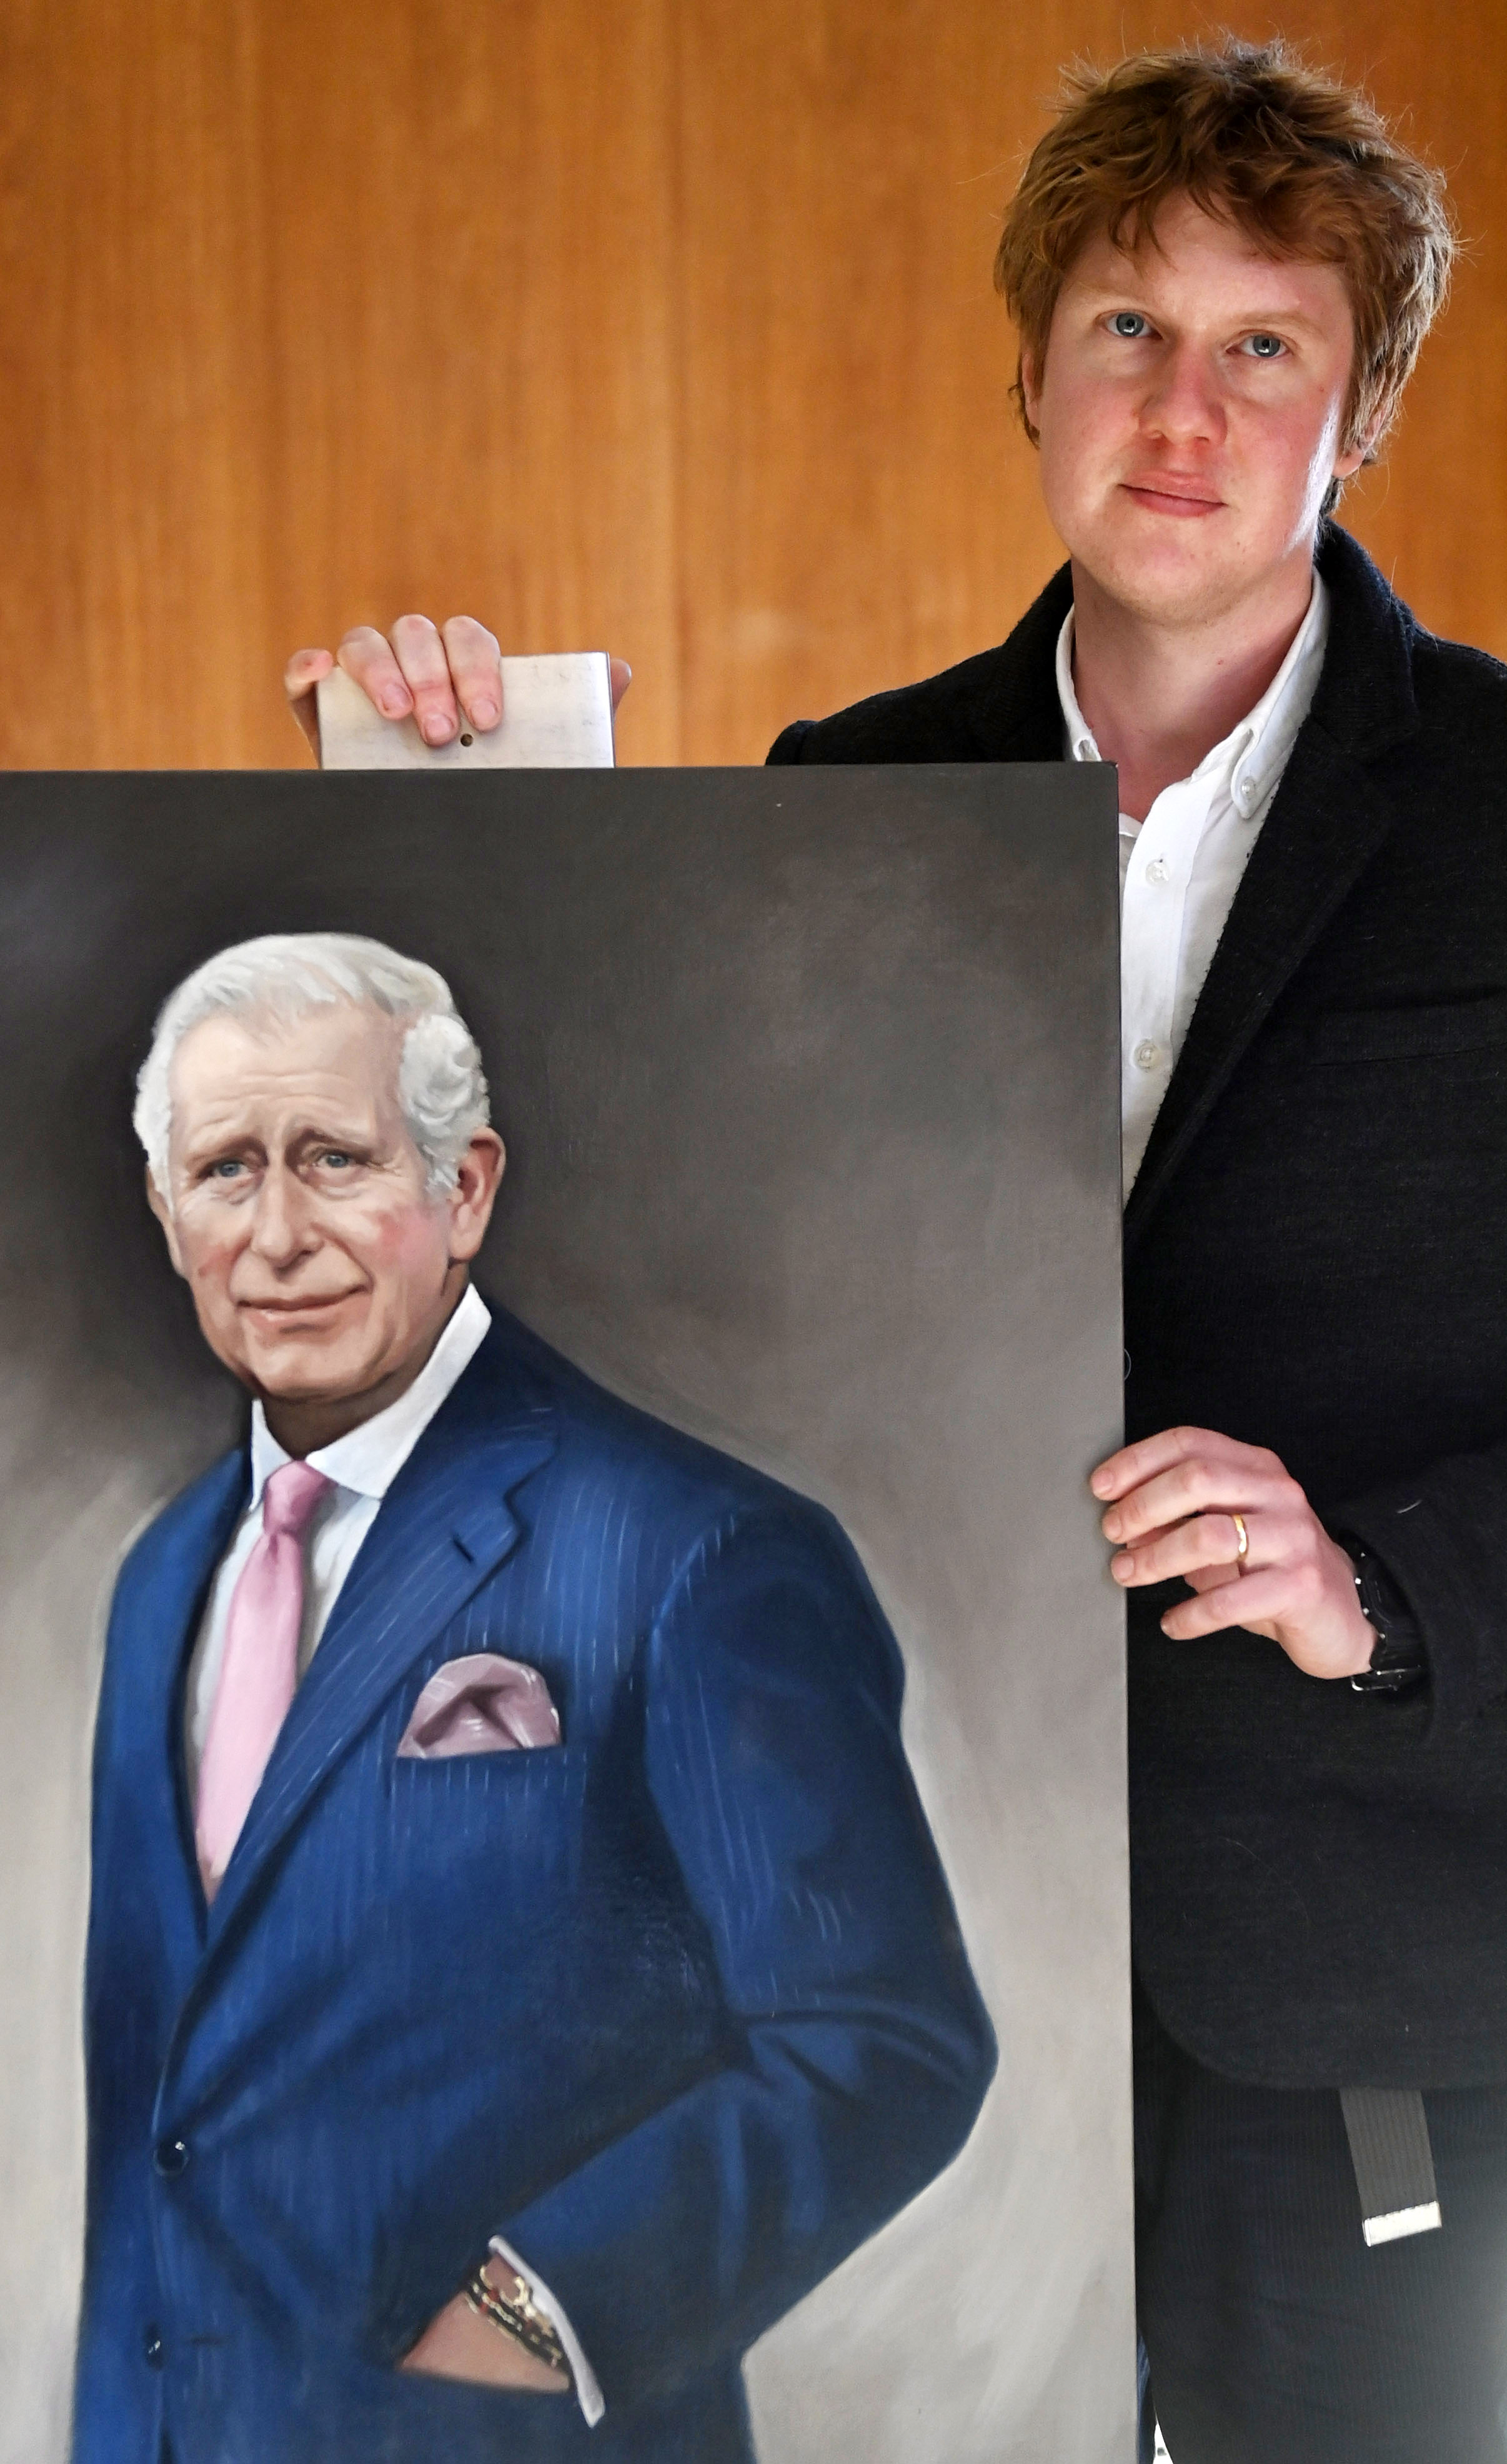 <p>Artist Alastair Barford posed with his work -- an oil painting of King Charles III commissioned by The Illustrated London News corporate magazine -- in London on April 4, 2023. Alastair previously painted the late Queen Elizabeth II.</p>